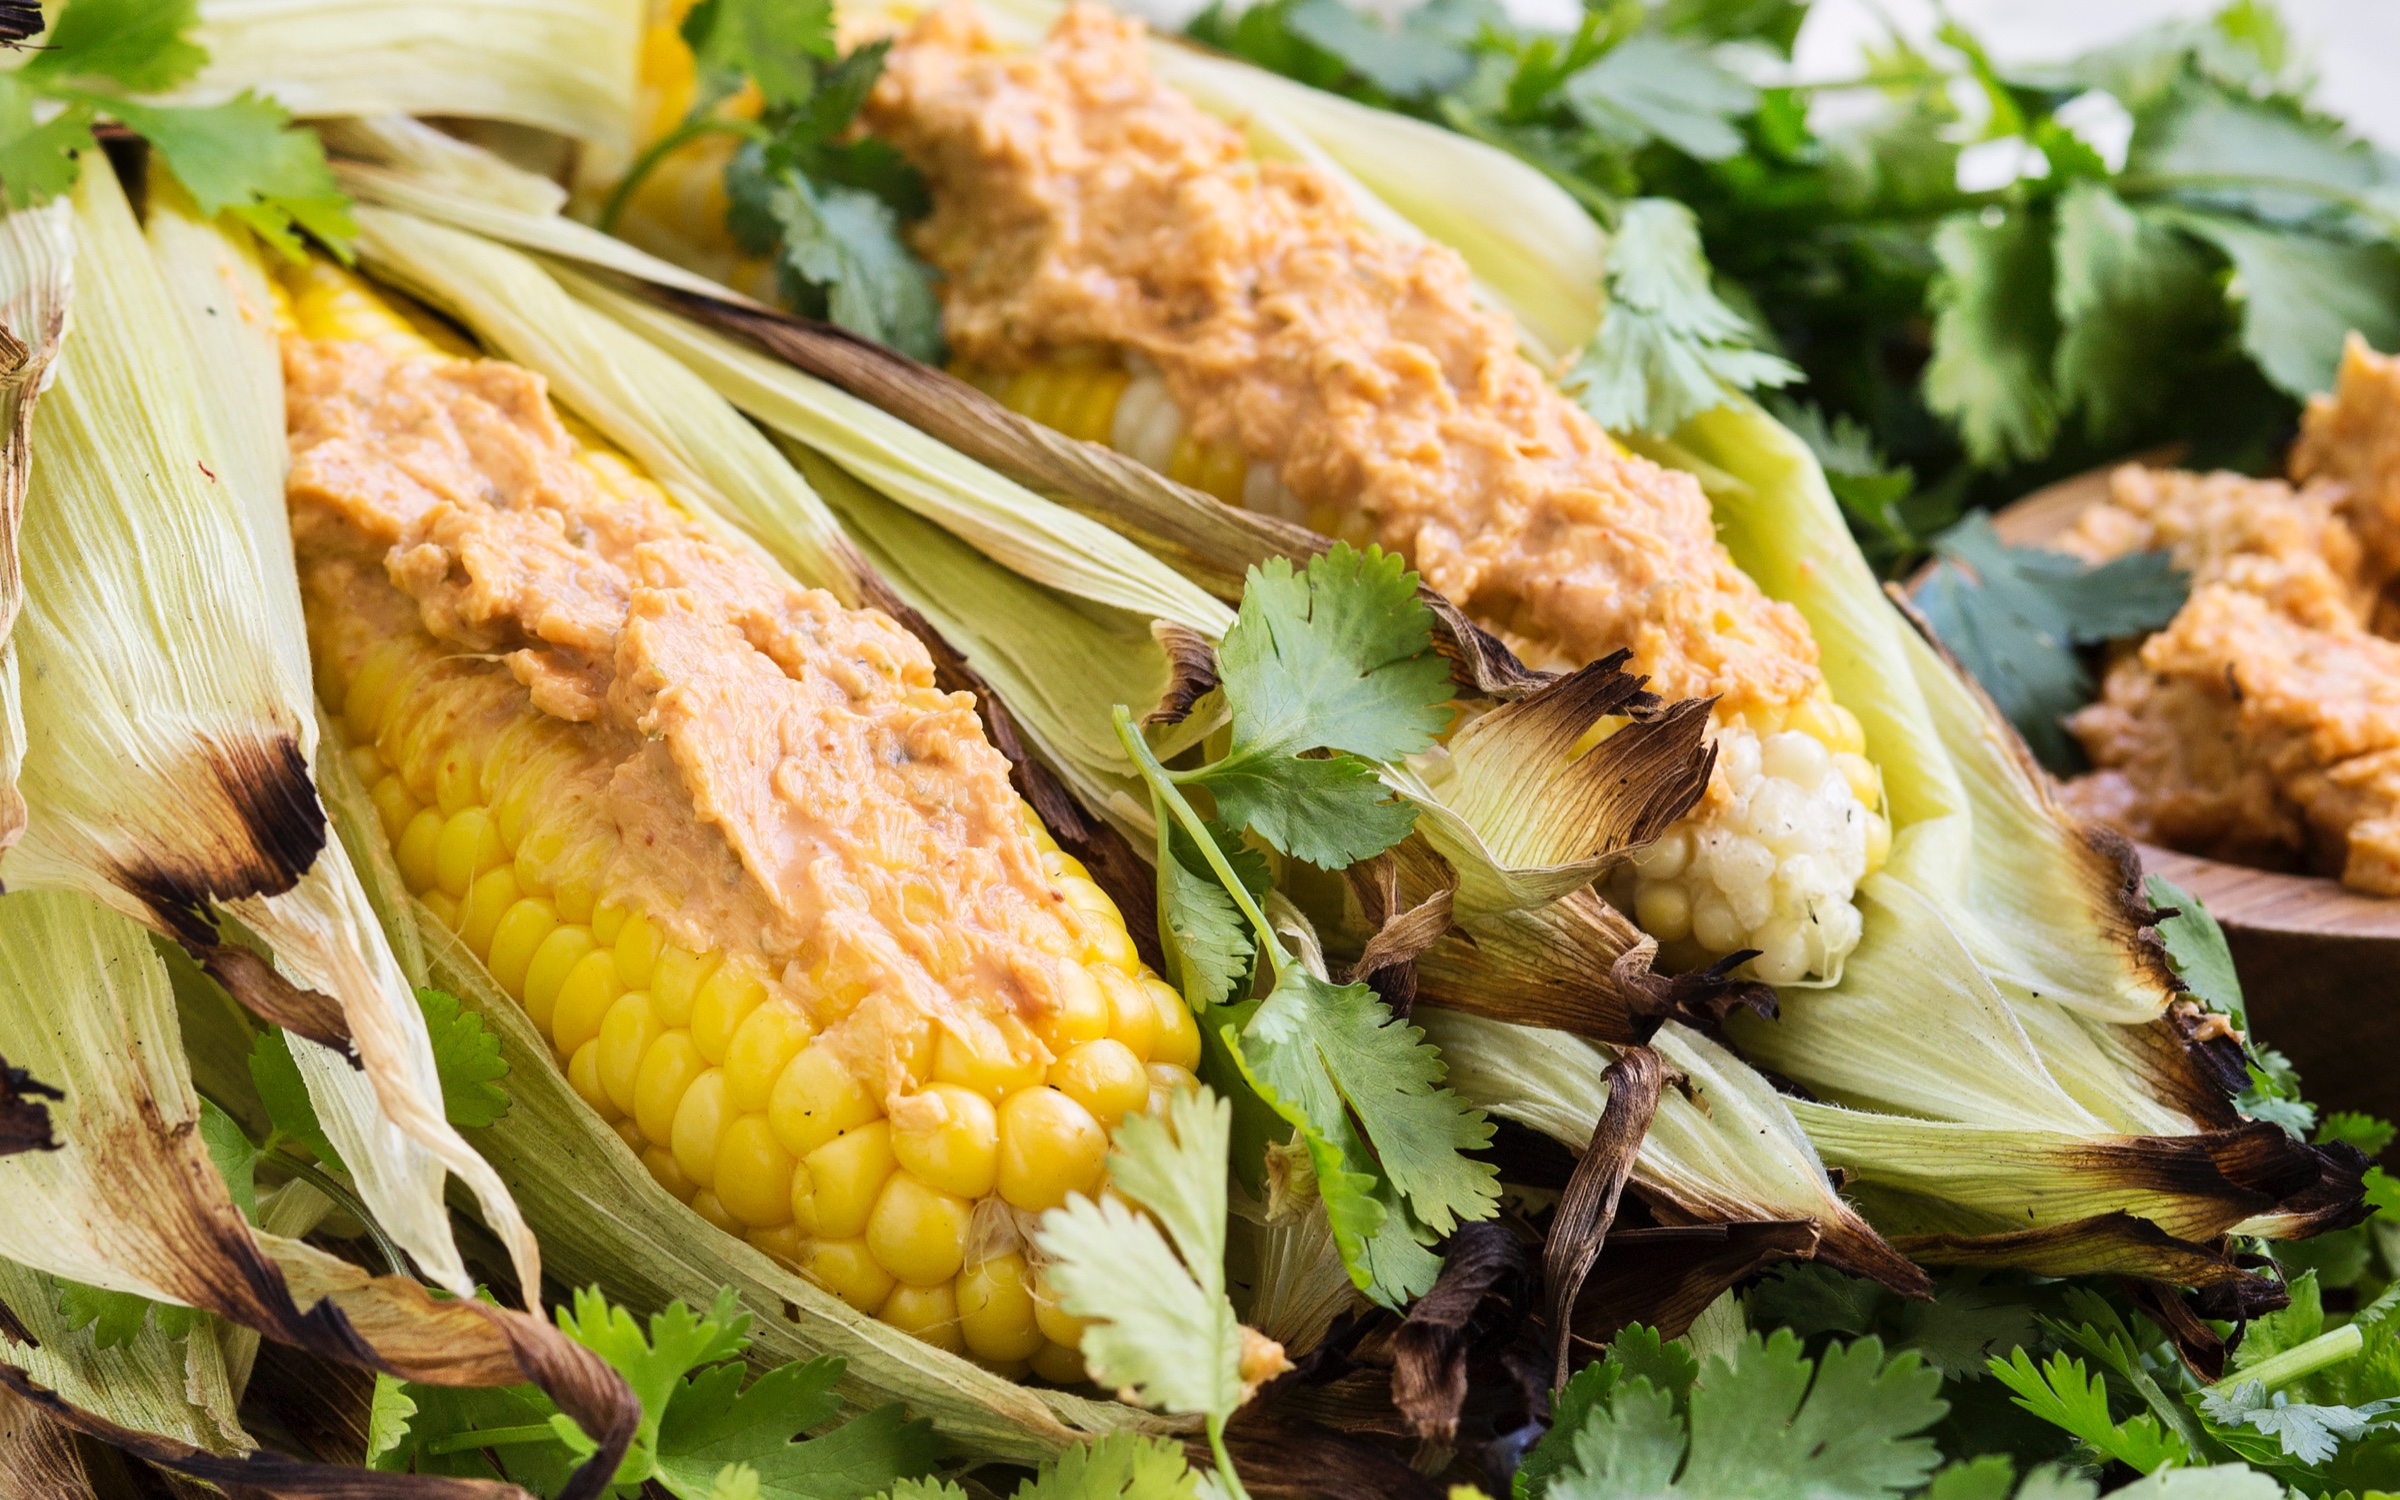 Corn on the cob with sauce by San-J